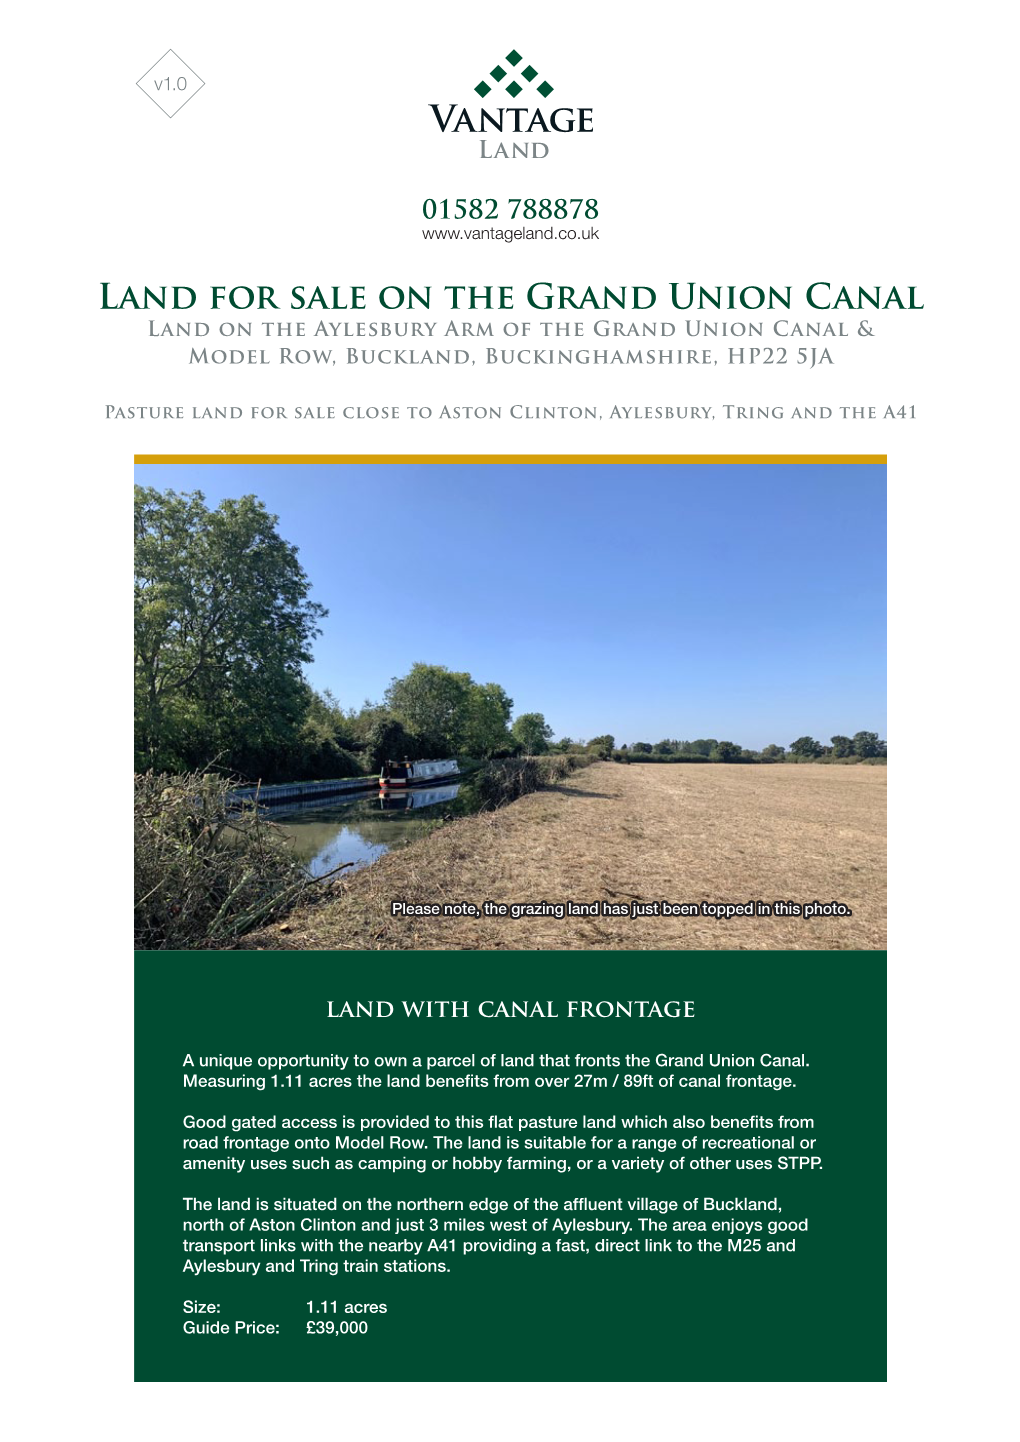 Land for Sale on the Grand Union Canal Land on the Aylesbury Arm of the Grand Union Canal & Model Row, Buckland, Buckinghamshire, HP22 5JA